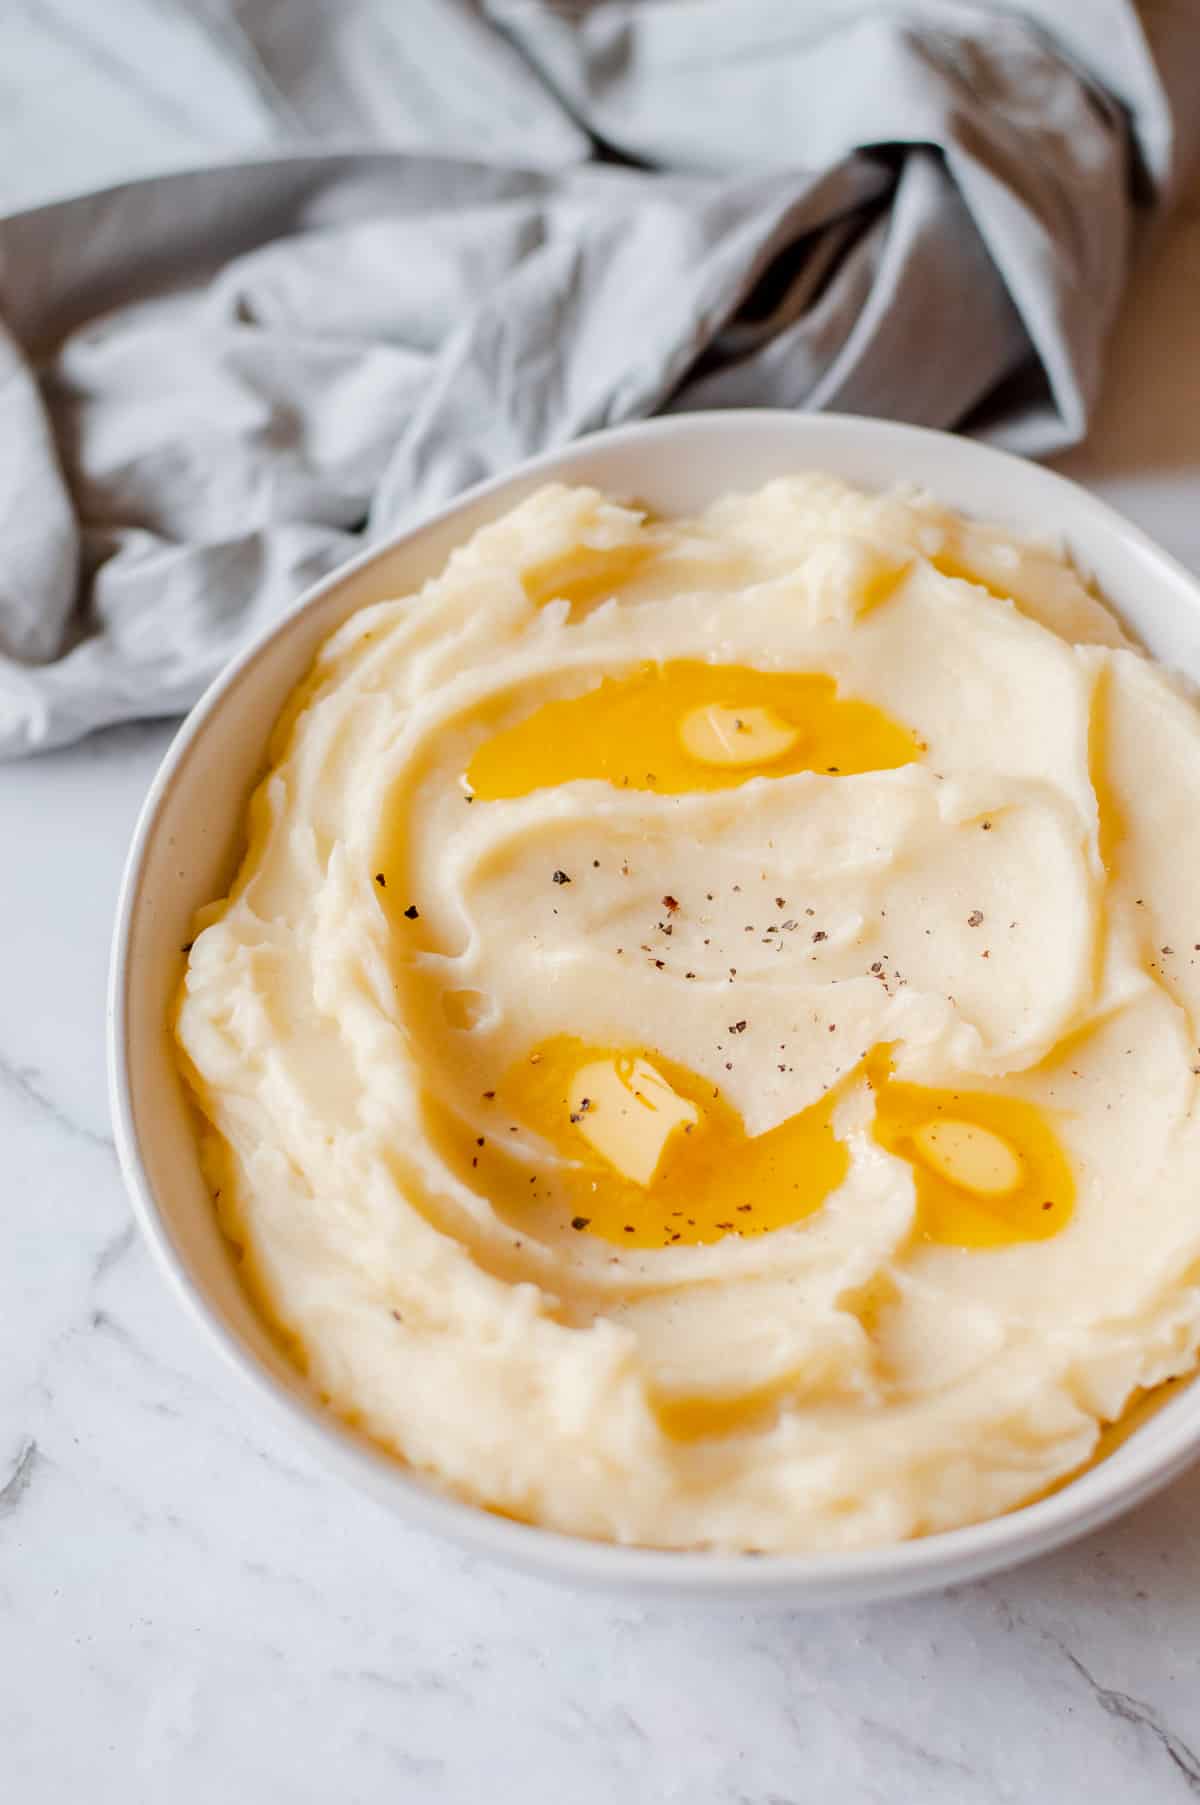 mashed potato in white bowl with melted butter on top.